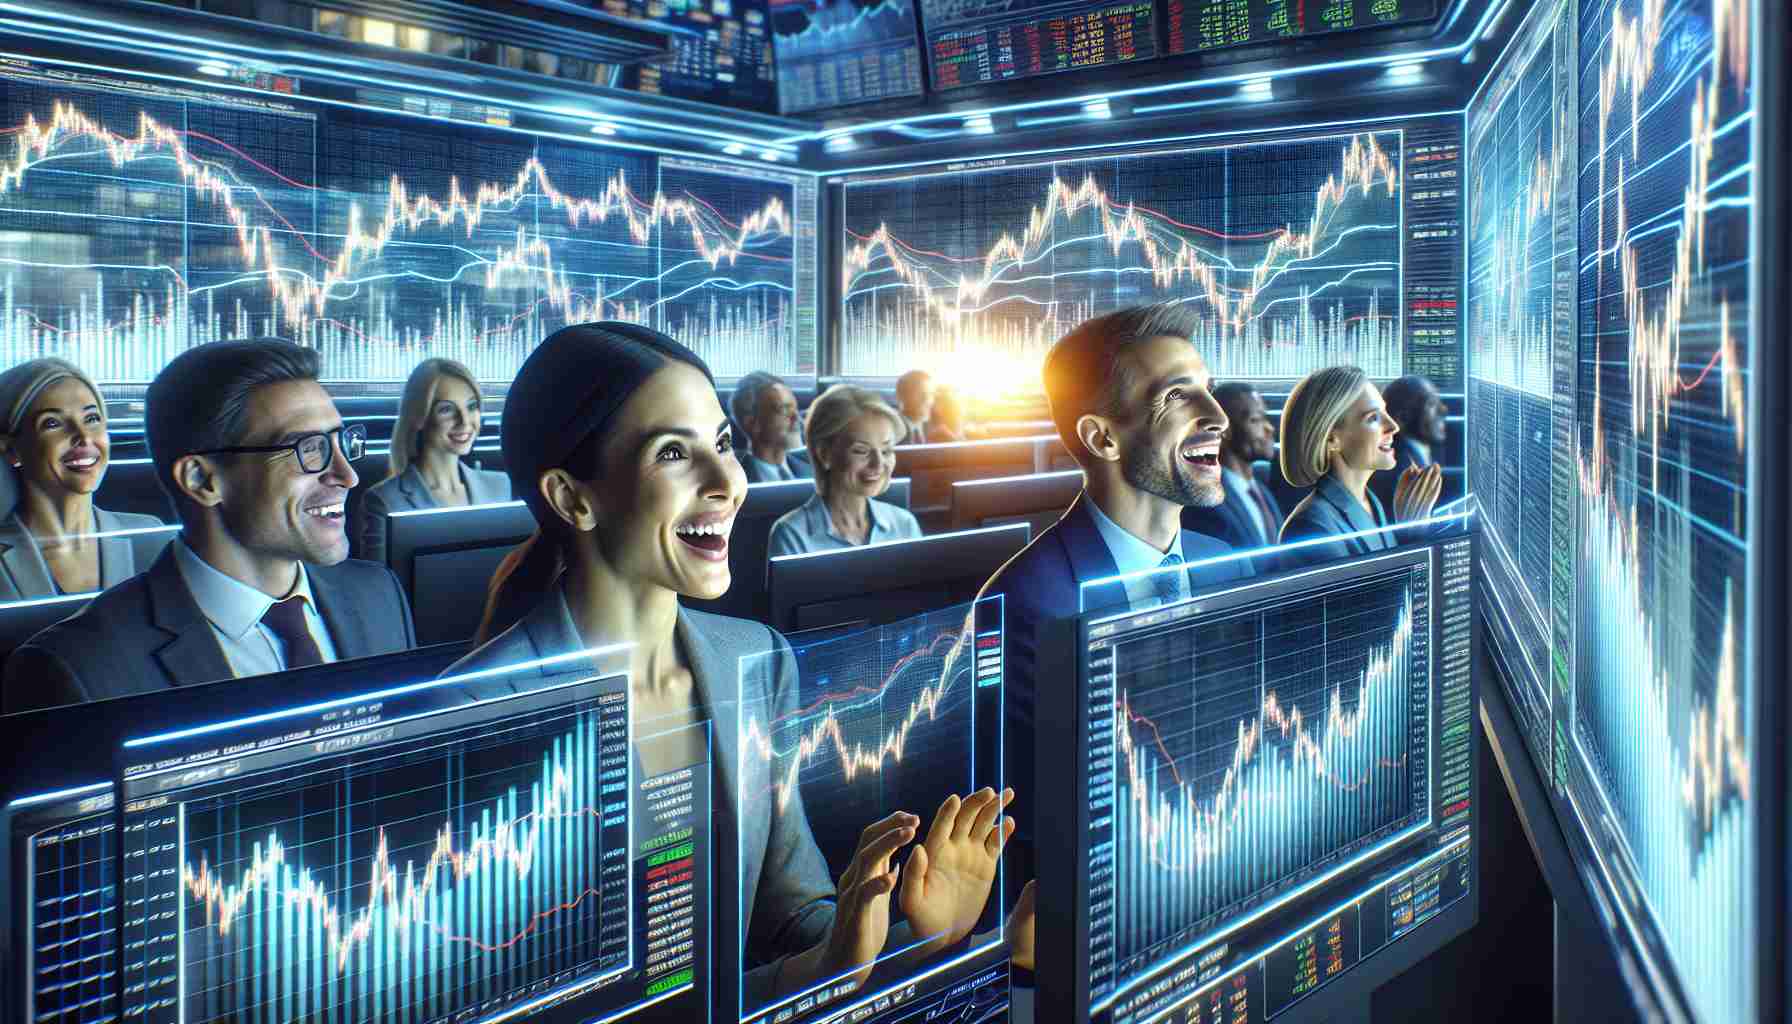 Generate a realistic high-definition image portraying the scene of the stock market opening enthusiastically. Visualize a bustling trading floor with a diverse array of traders, including a Caucasian female trader and a Black male trader, eagerly watching their screens. Illuminated charts and graphs should cover the screens with various upwards trending lines indicating positive market movement. The atmosphere should exhibit a sense of excitement and anticipation.